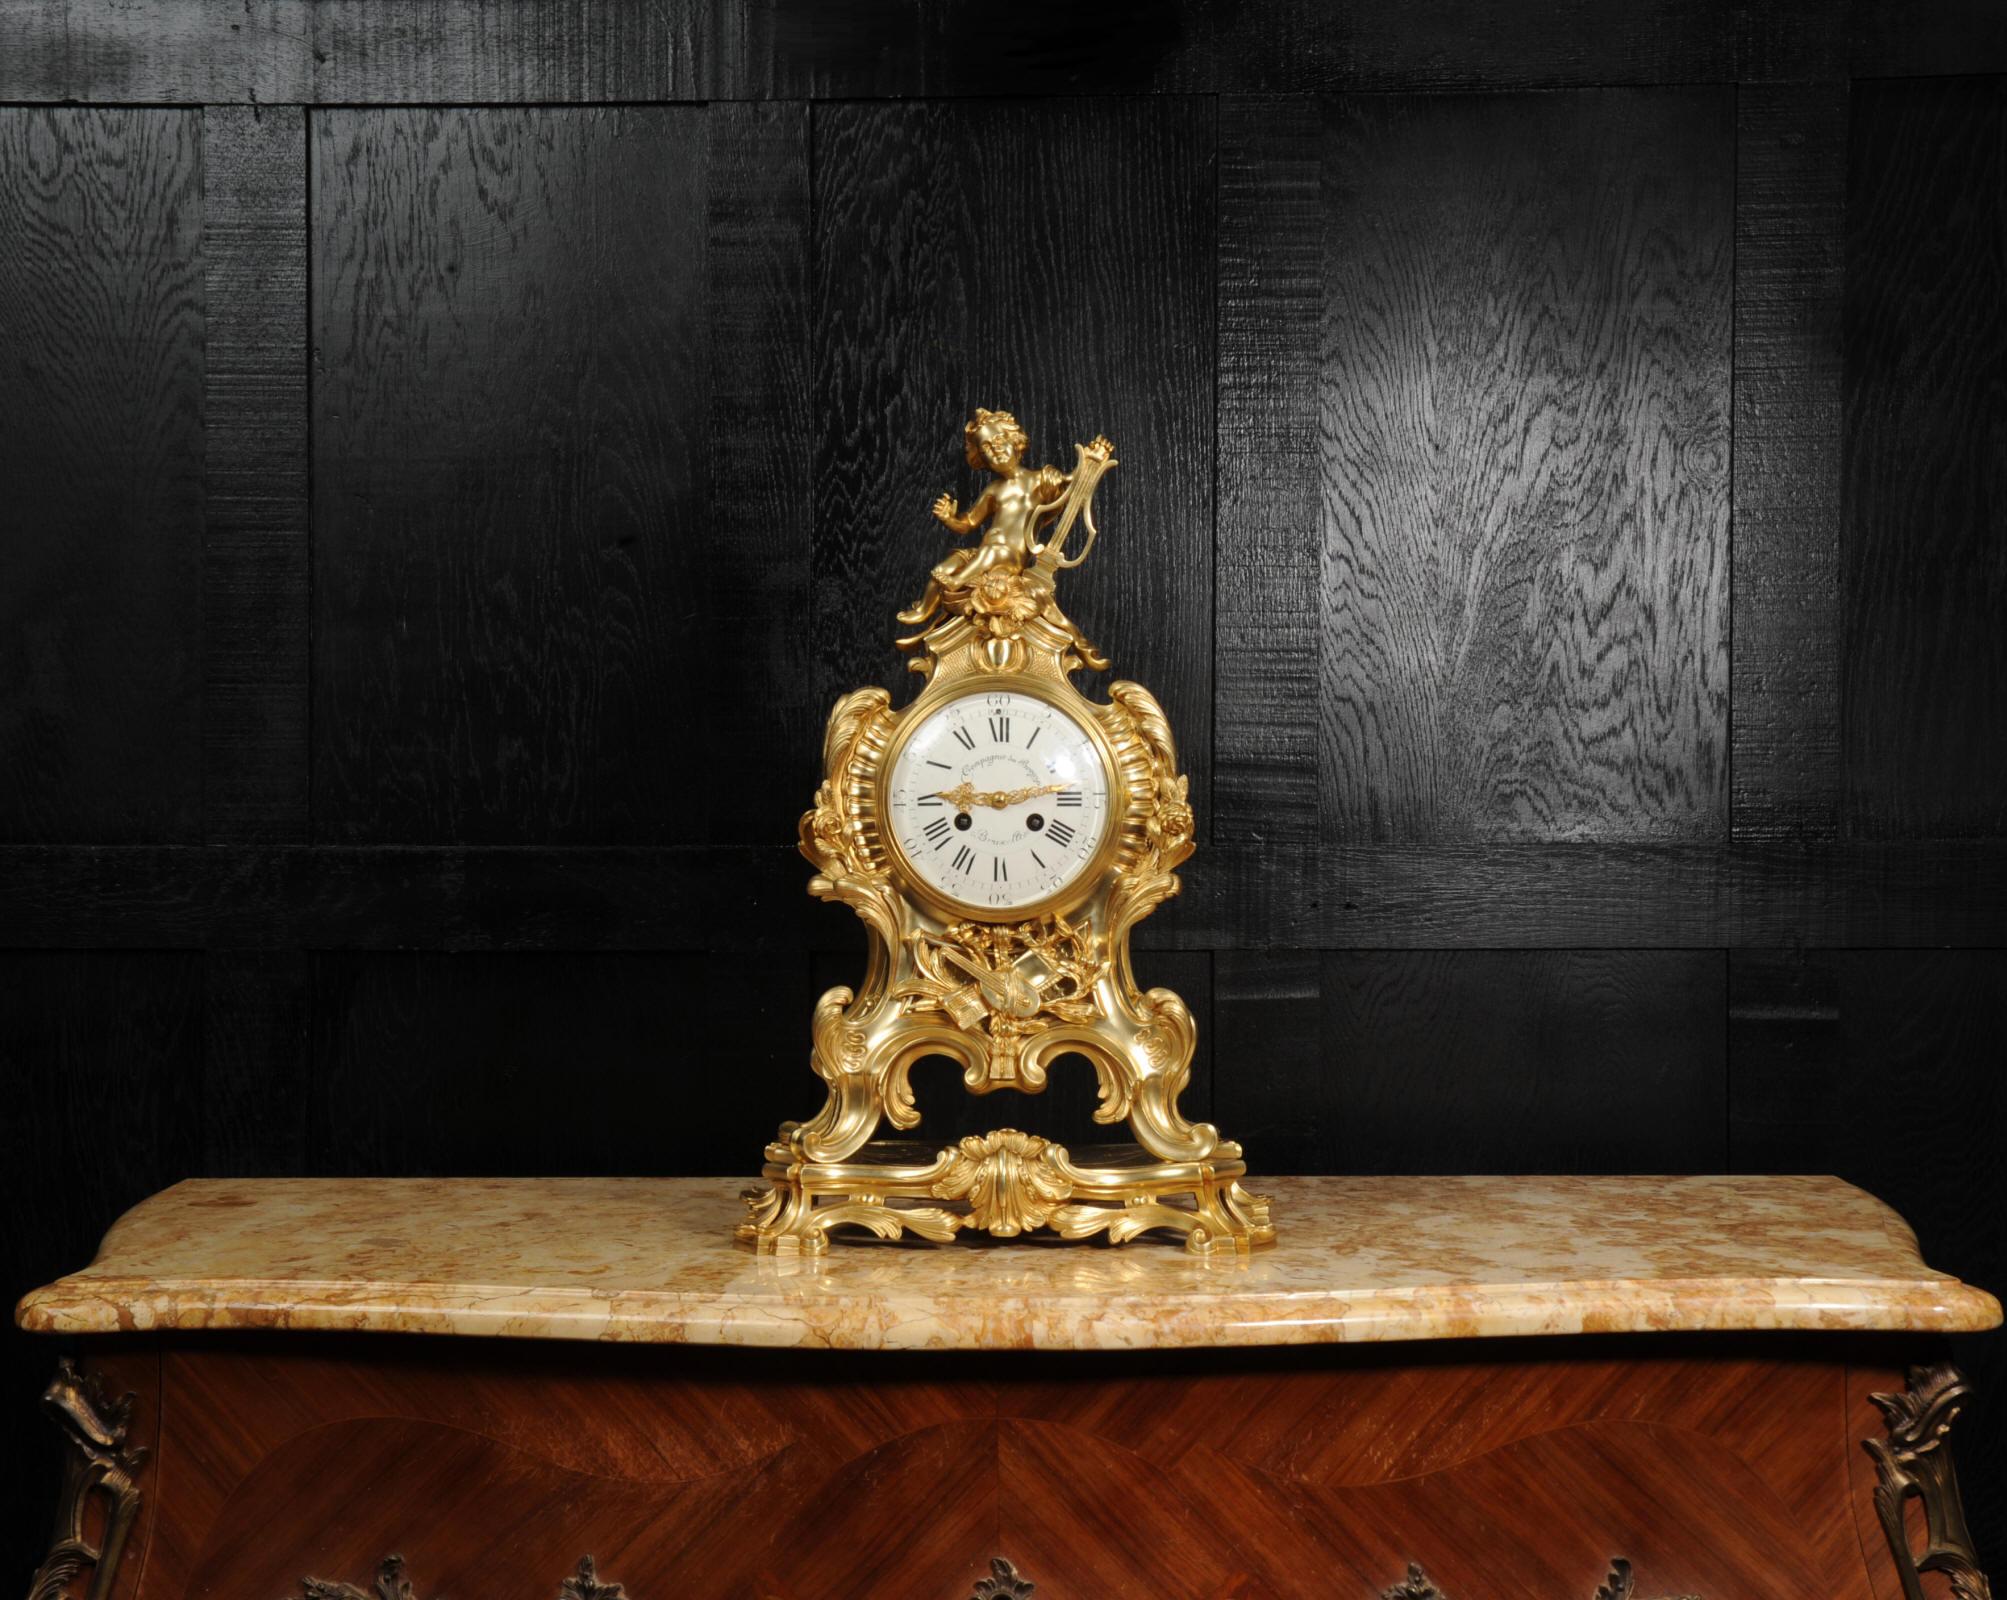 A superb and substantial ormolu clock from a design by the 18th century bronze founder Robert Osmond and made by the famous Compagnie des Bronze of Brussels. Louis XV in style, an elegant waisted case formed of scrolls and acanthus. Fretted panels